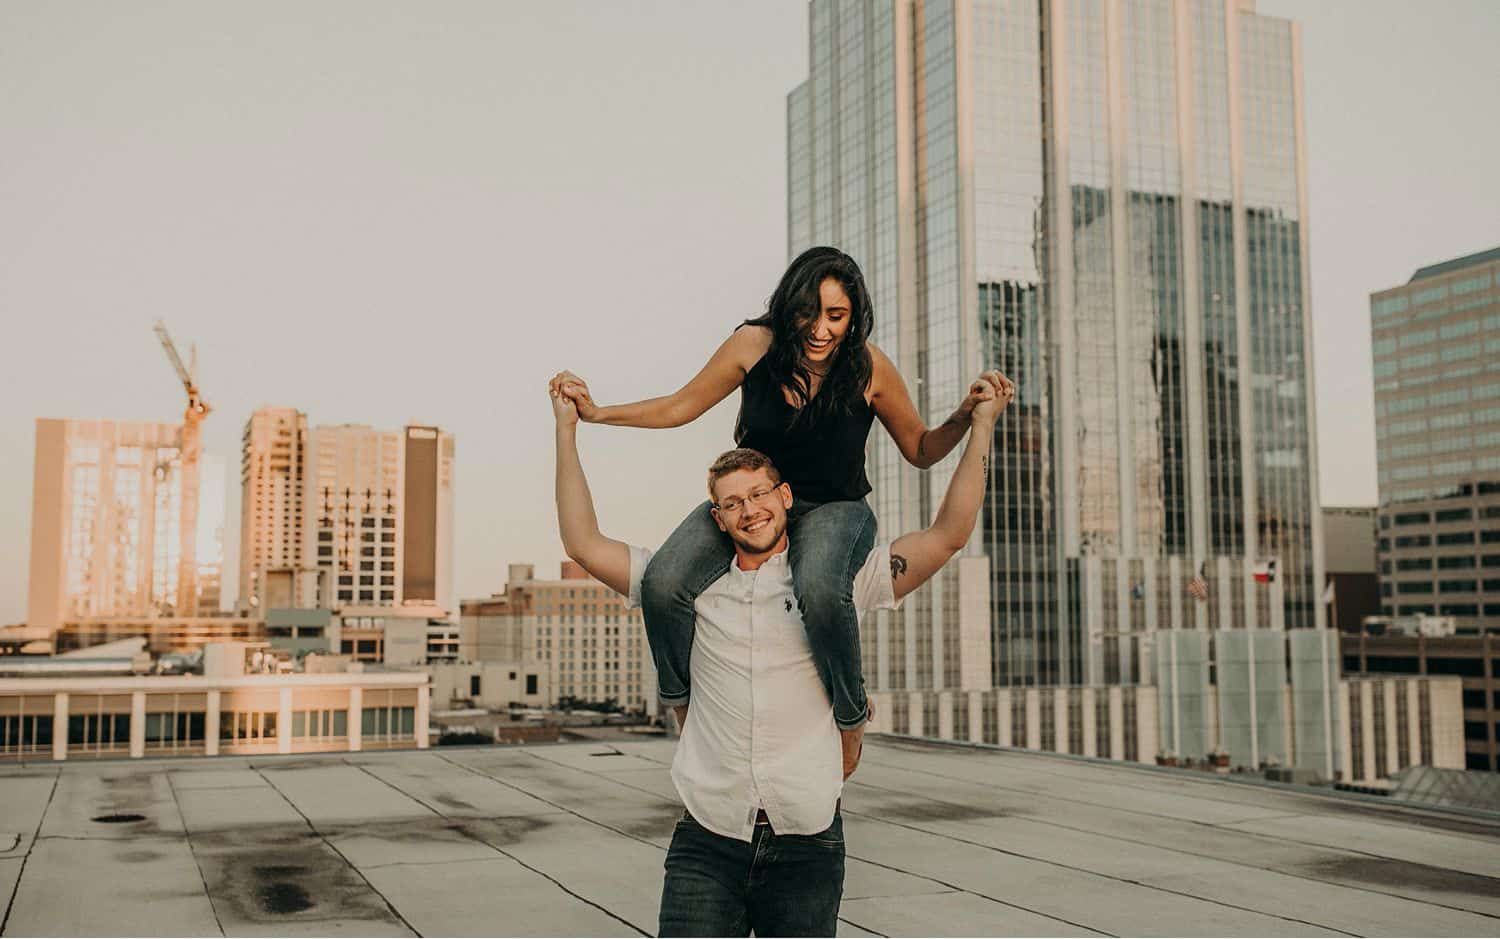 A woman sits on her boyfriend's shoulders and holds his outstretched hands as he walks across a city rooftop